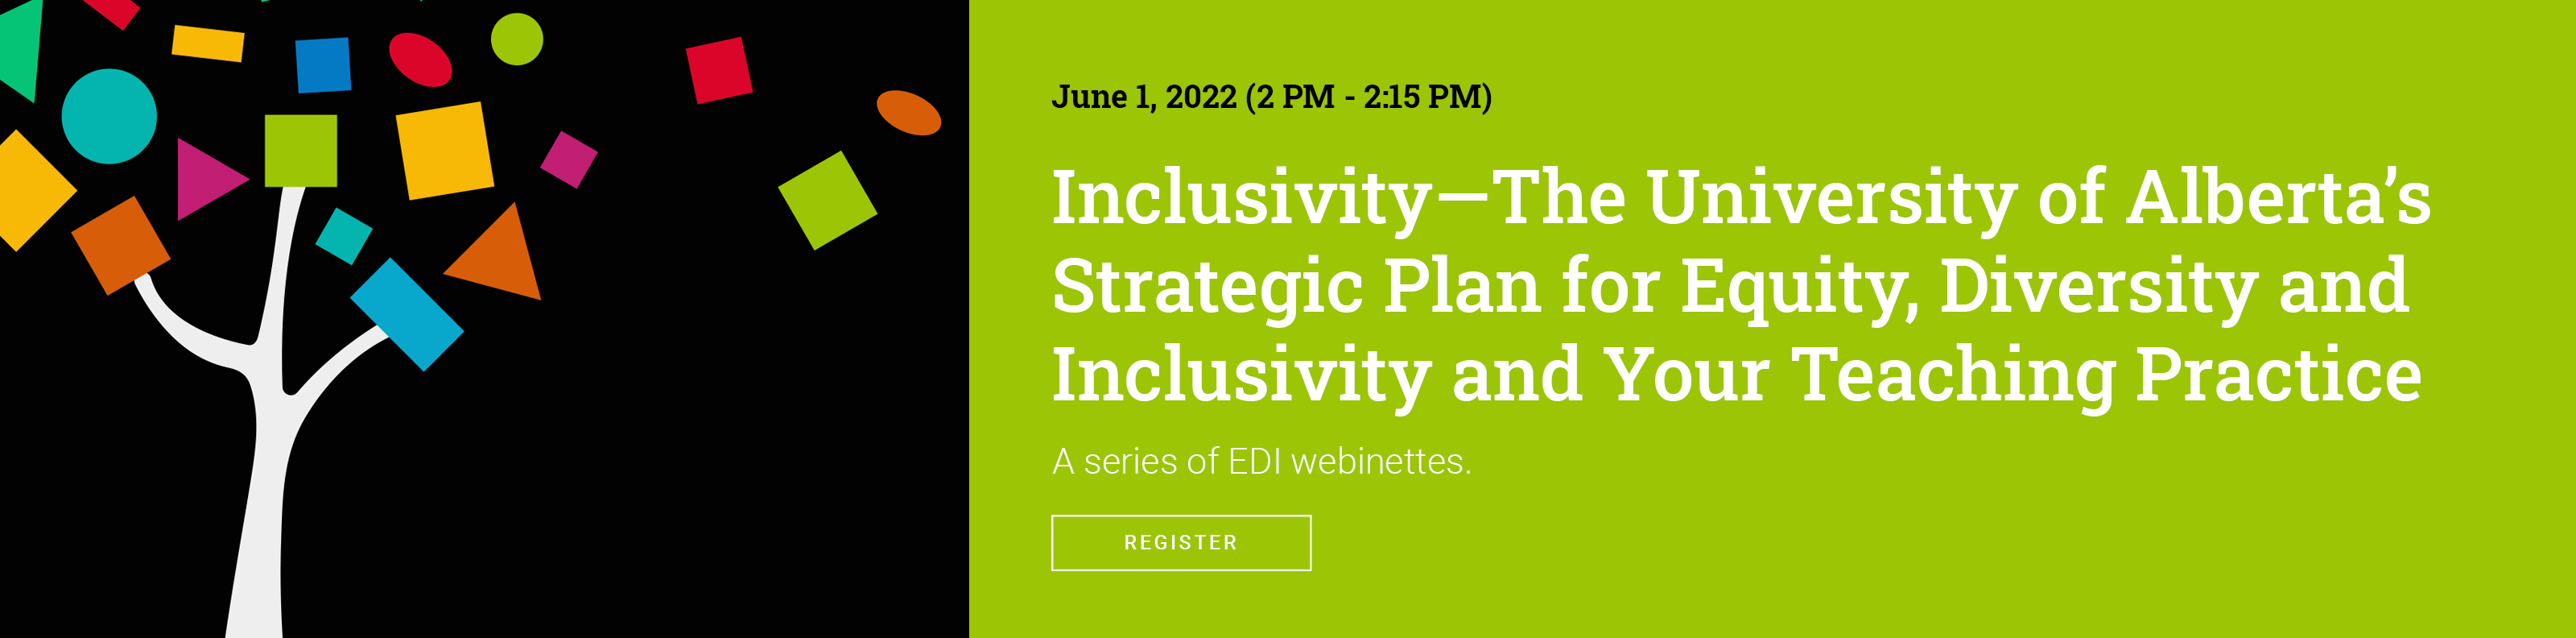 inclusivity-edi-strategic-plan-and-your-teaching-practice.png